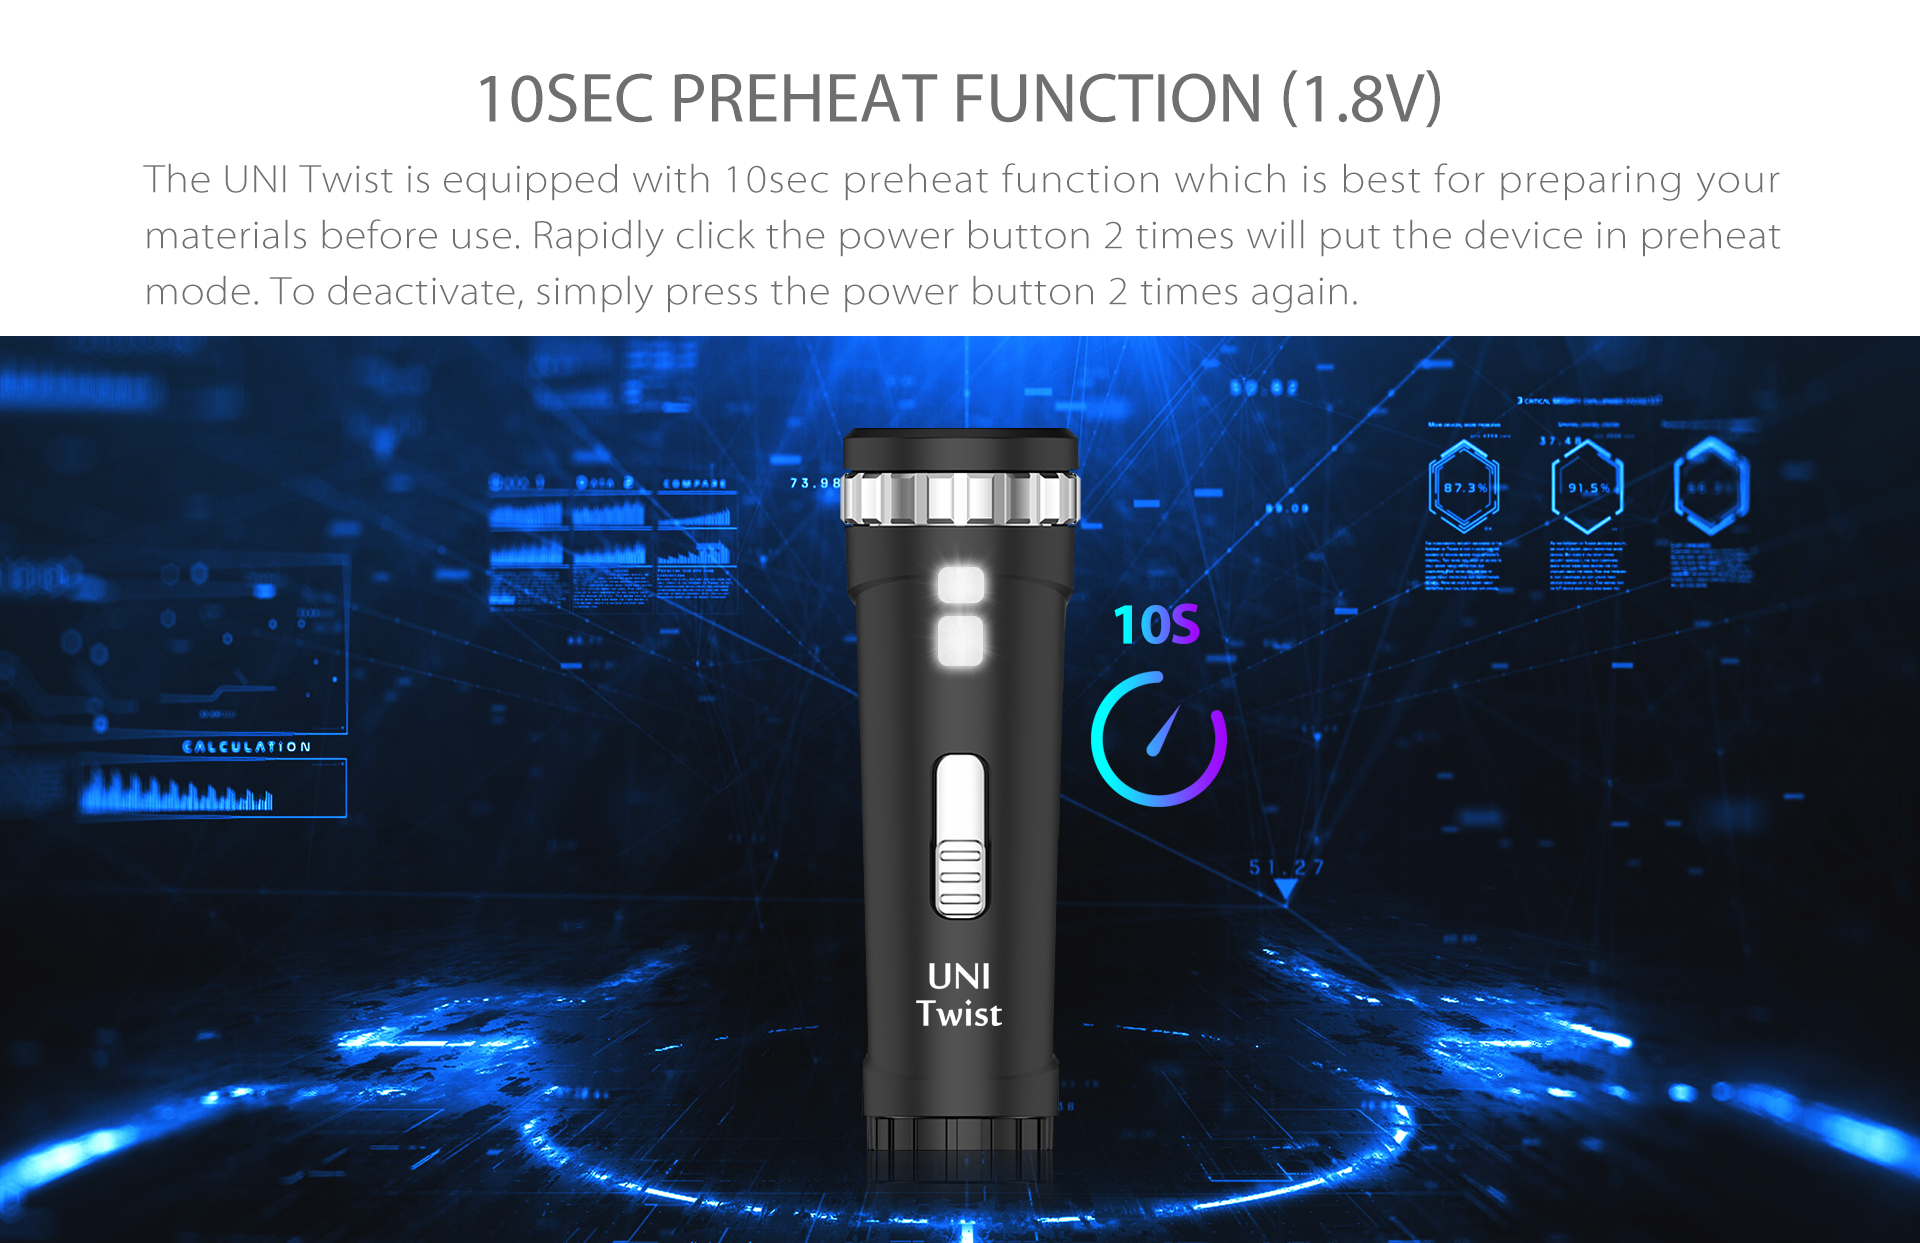 Yocan UNI Twist Universal Portable Mod is equipped with 10sec preheat function